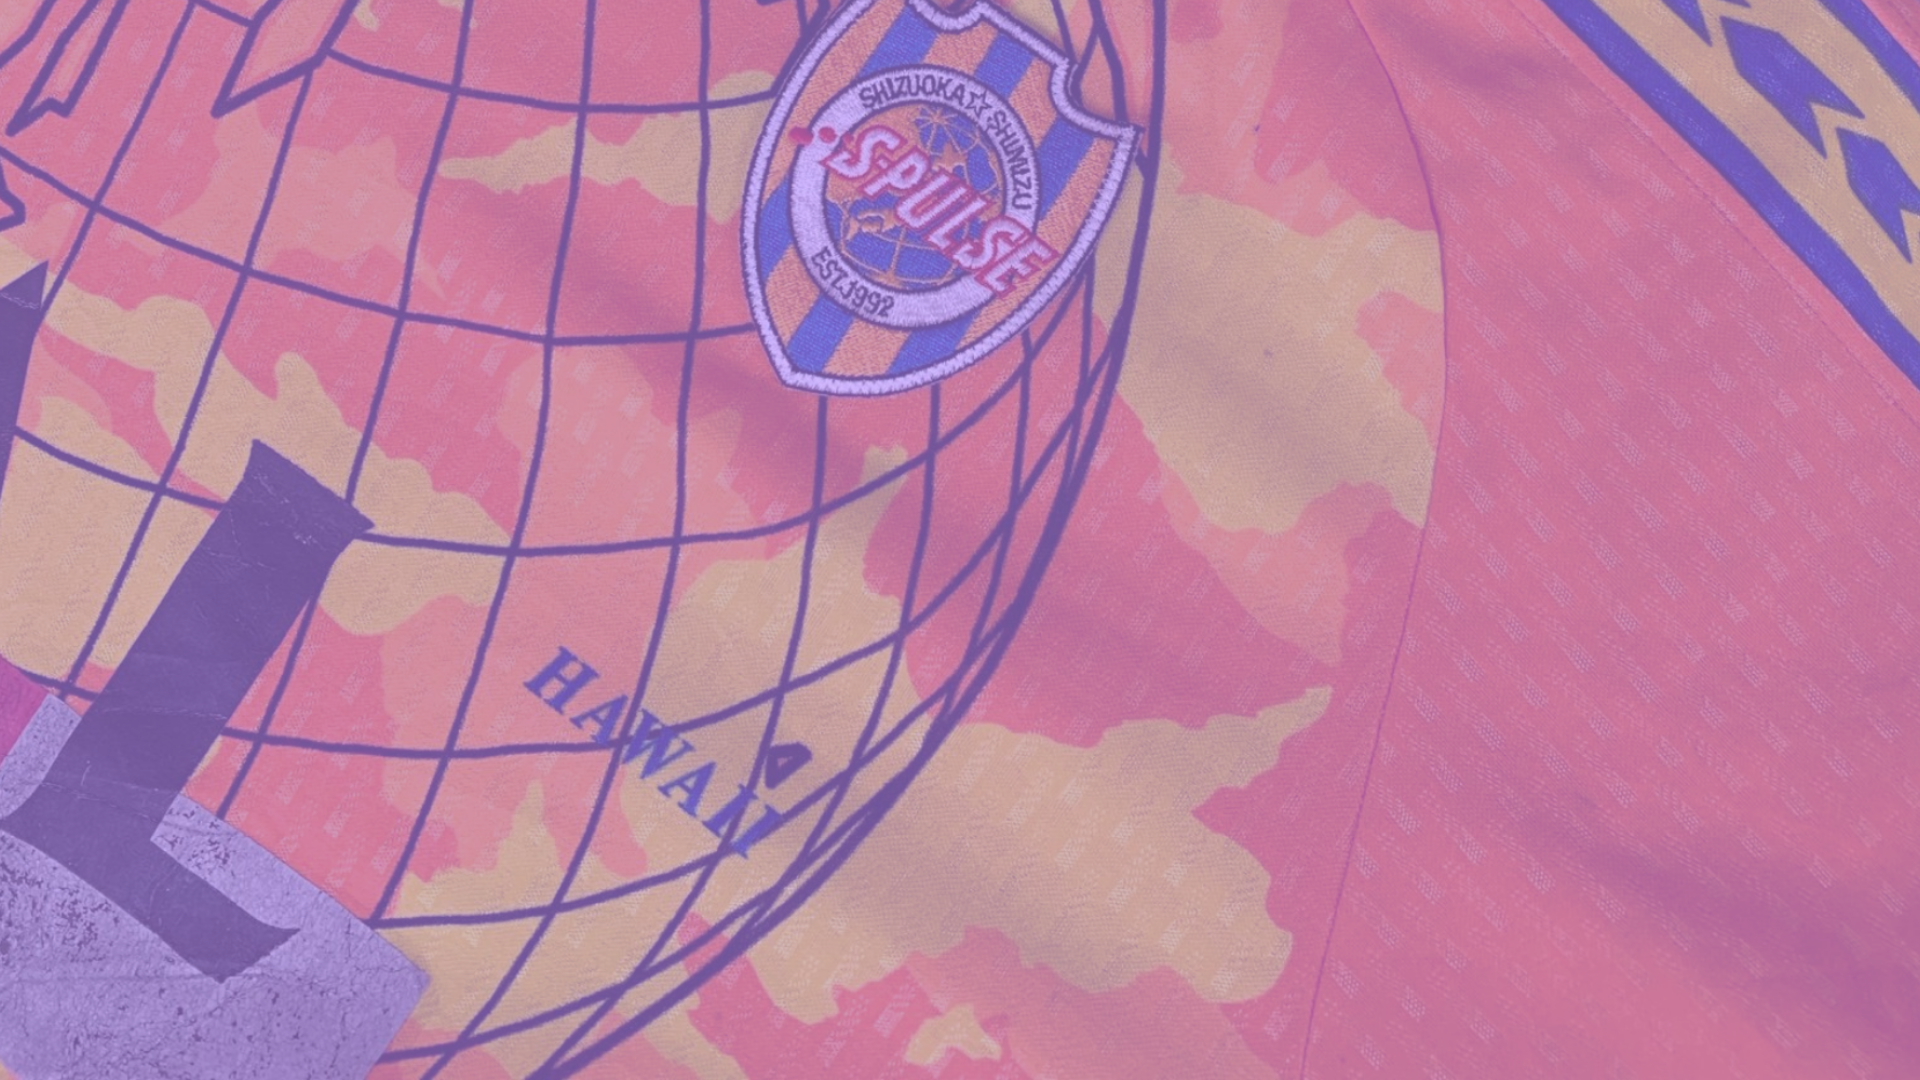 The reason Shimizu S-Pulse have maps on their shirts